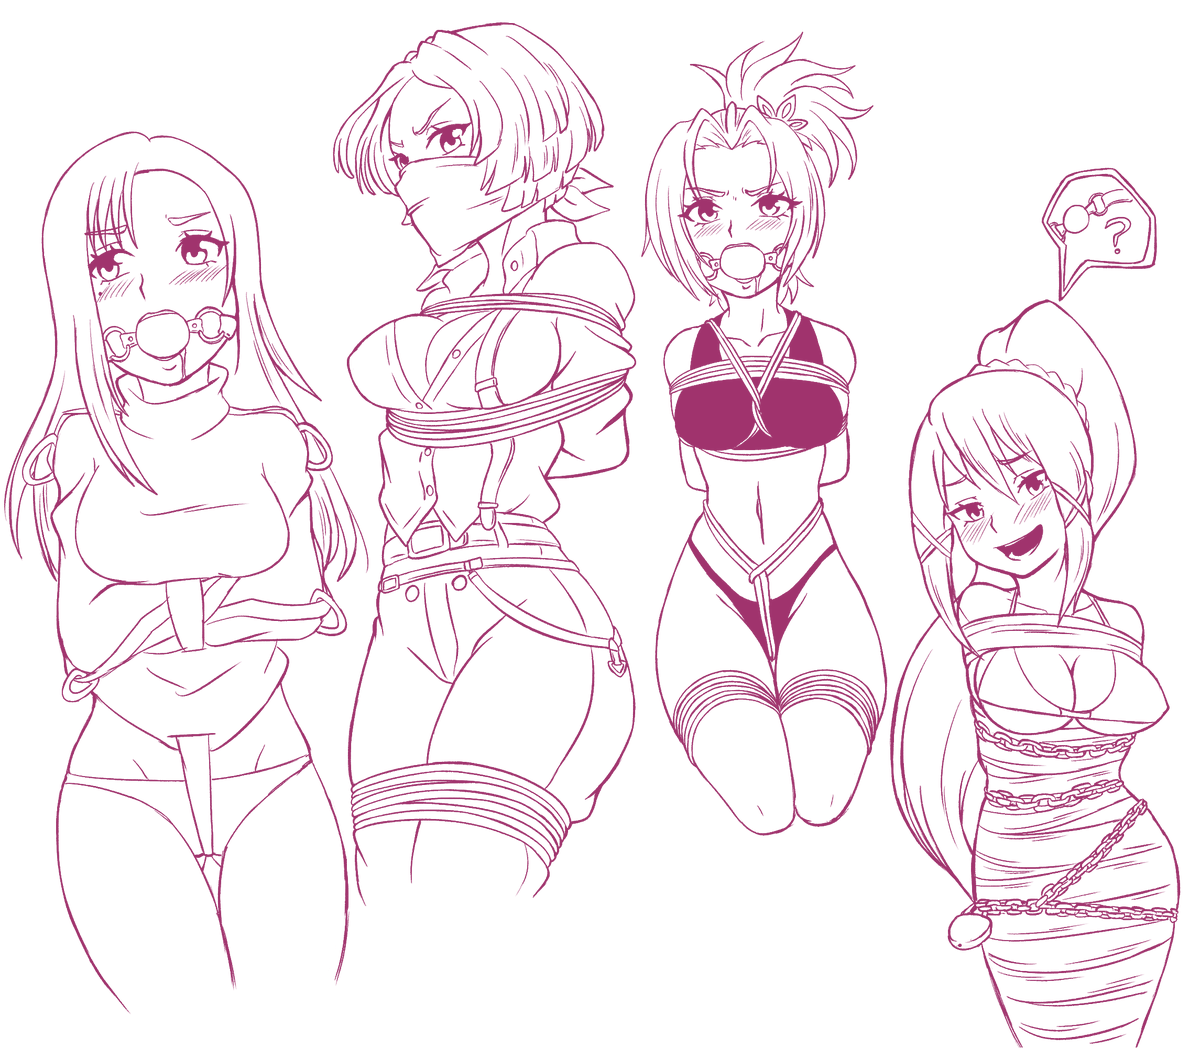 Another page of sketches that was streamed in my P@ytreon Discord!